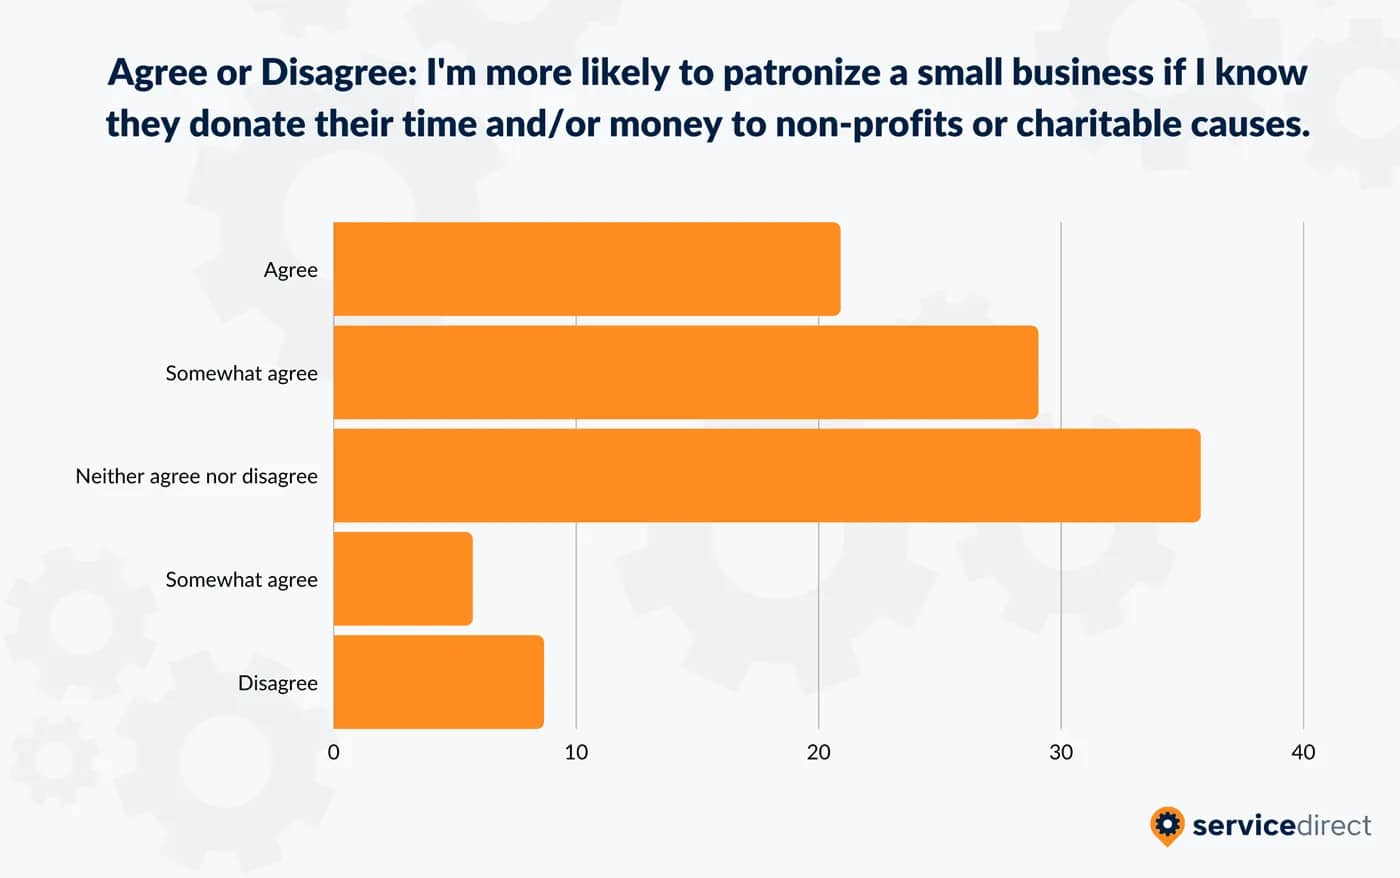 Importance-of-Charitable-Causes-When-Patronizing-Small-Business